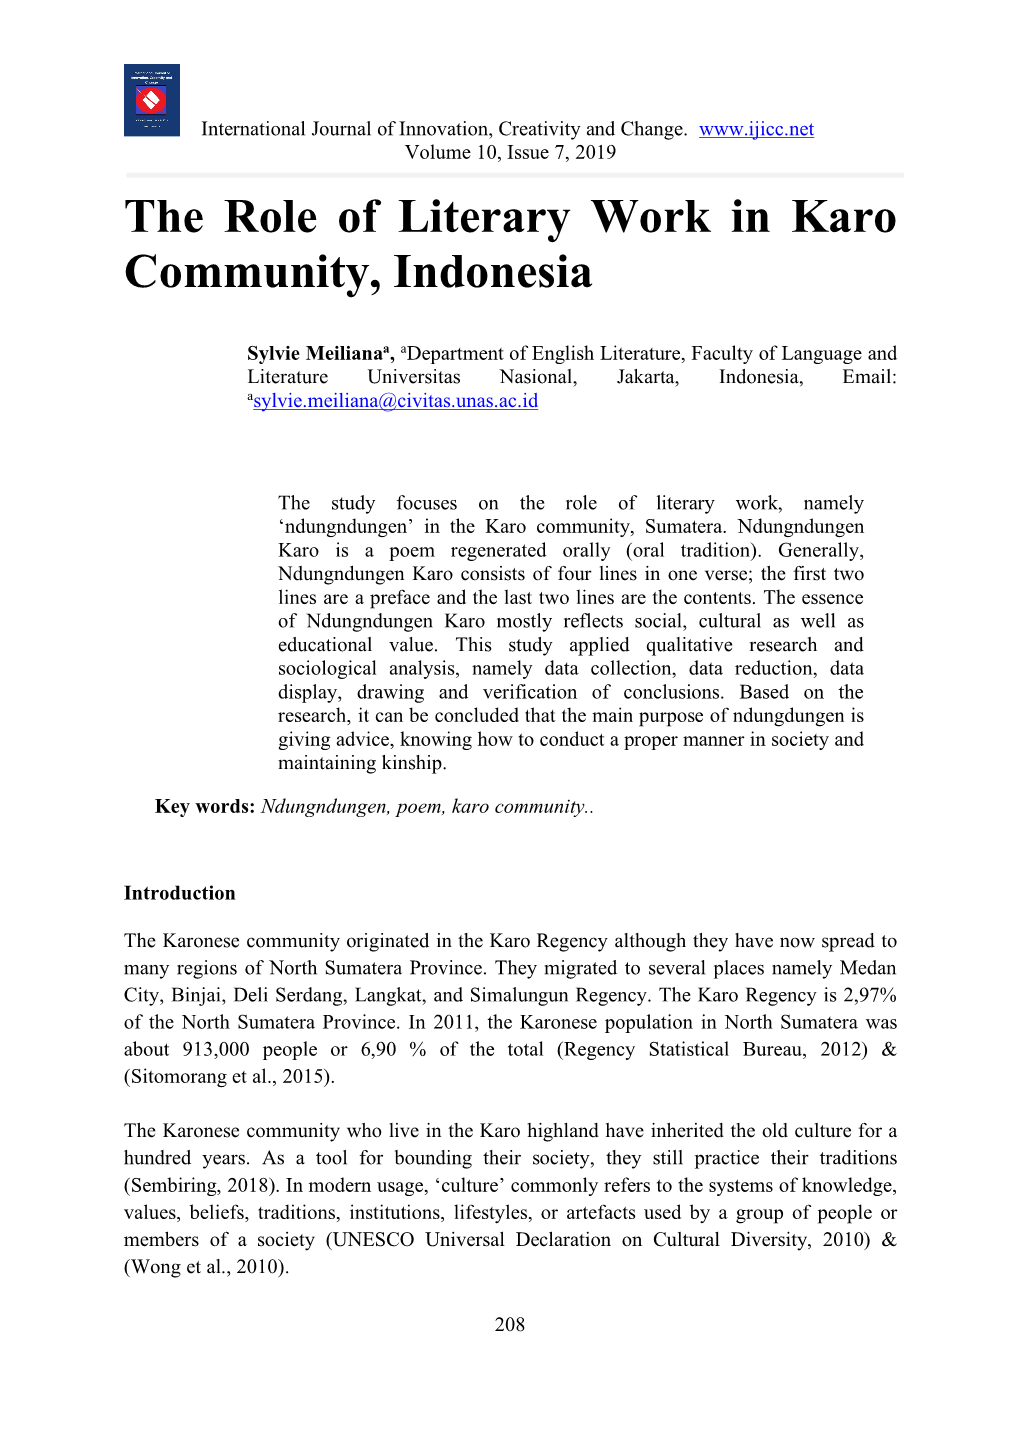 The Role of Literary Work in Karo Community, Indonesia